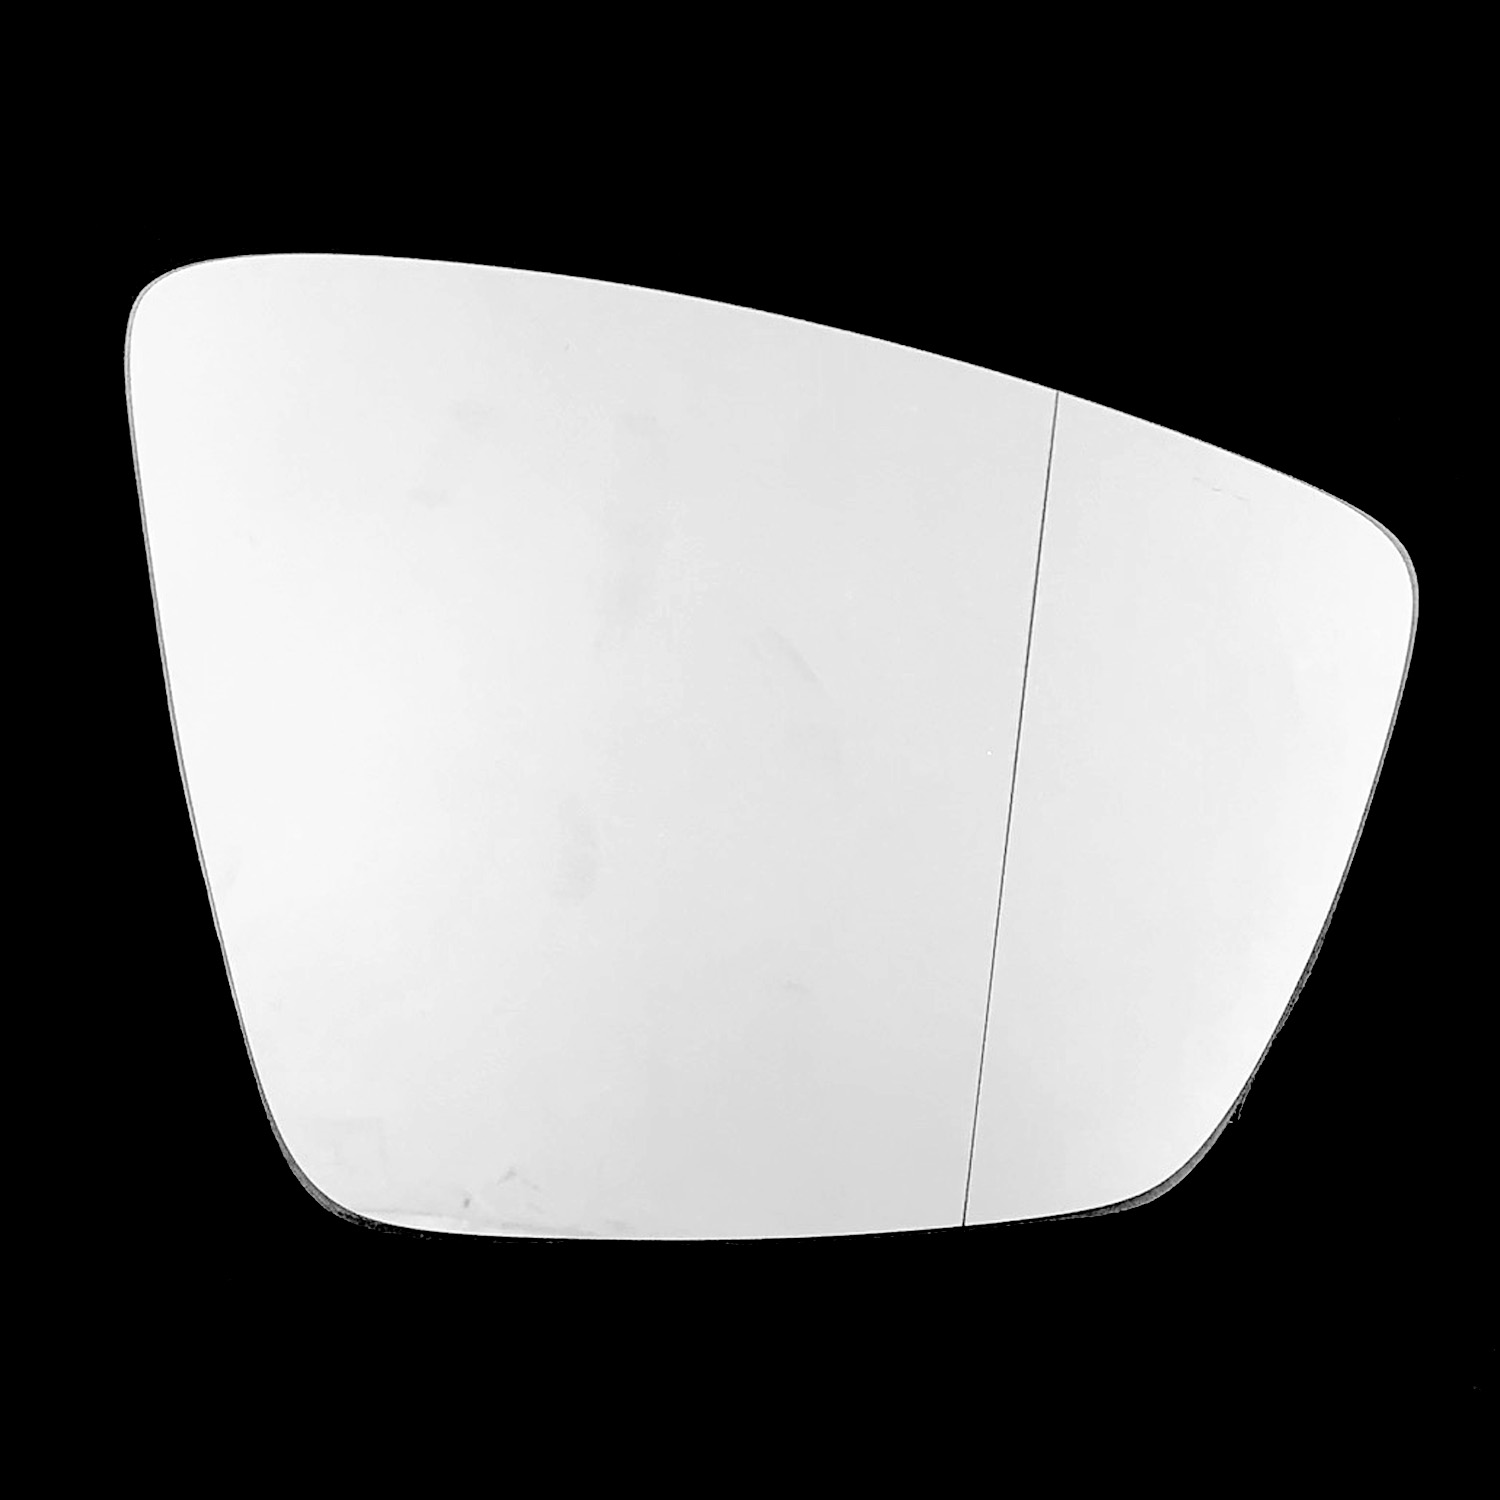 Skoda Kodiaq Wing Mirror Glass RIGHT HAND ( UK Driver Side ) 2016 to 2020 – Wide Angle Wing Mirror